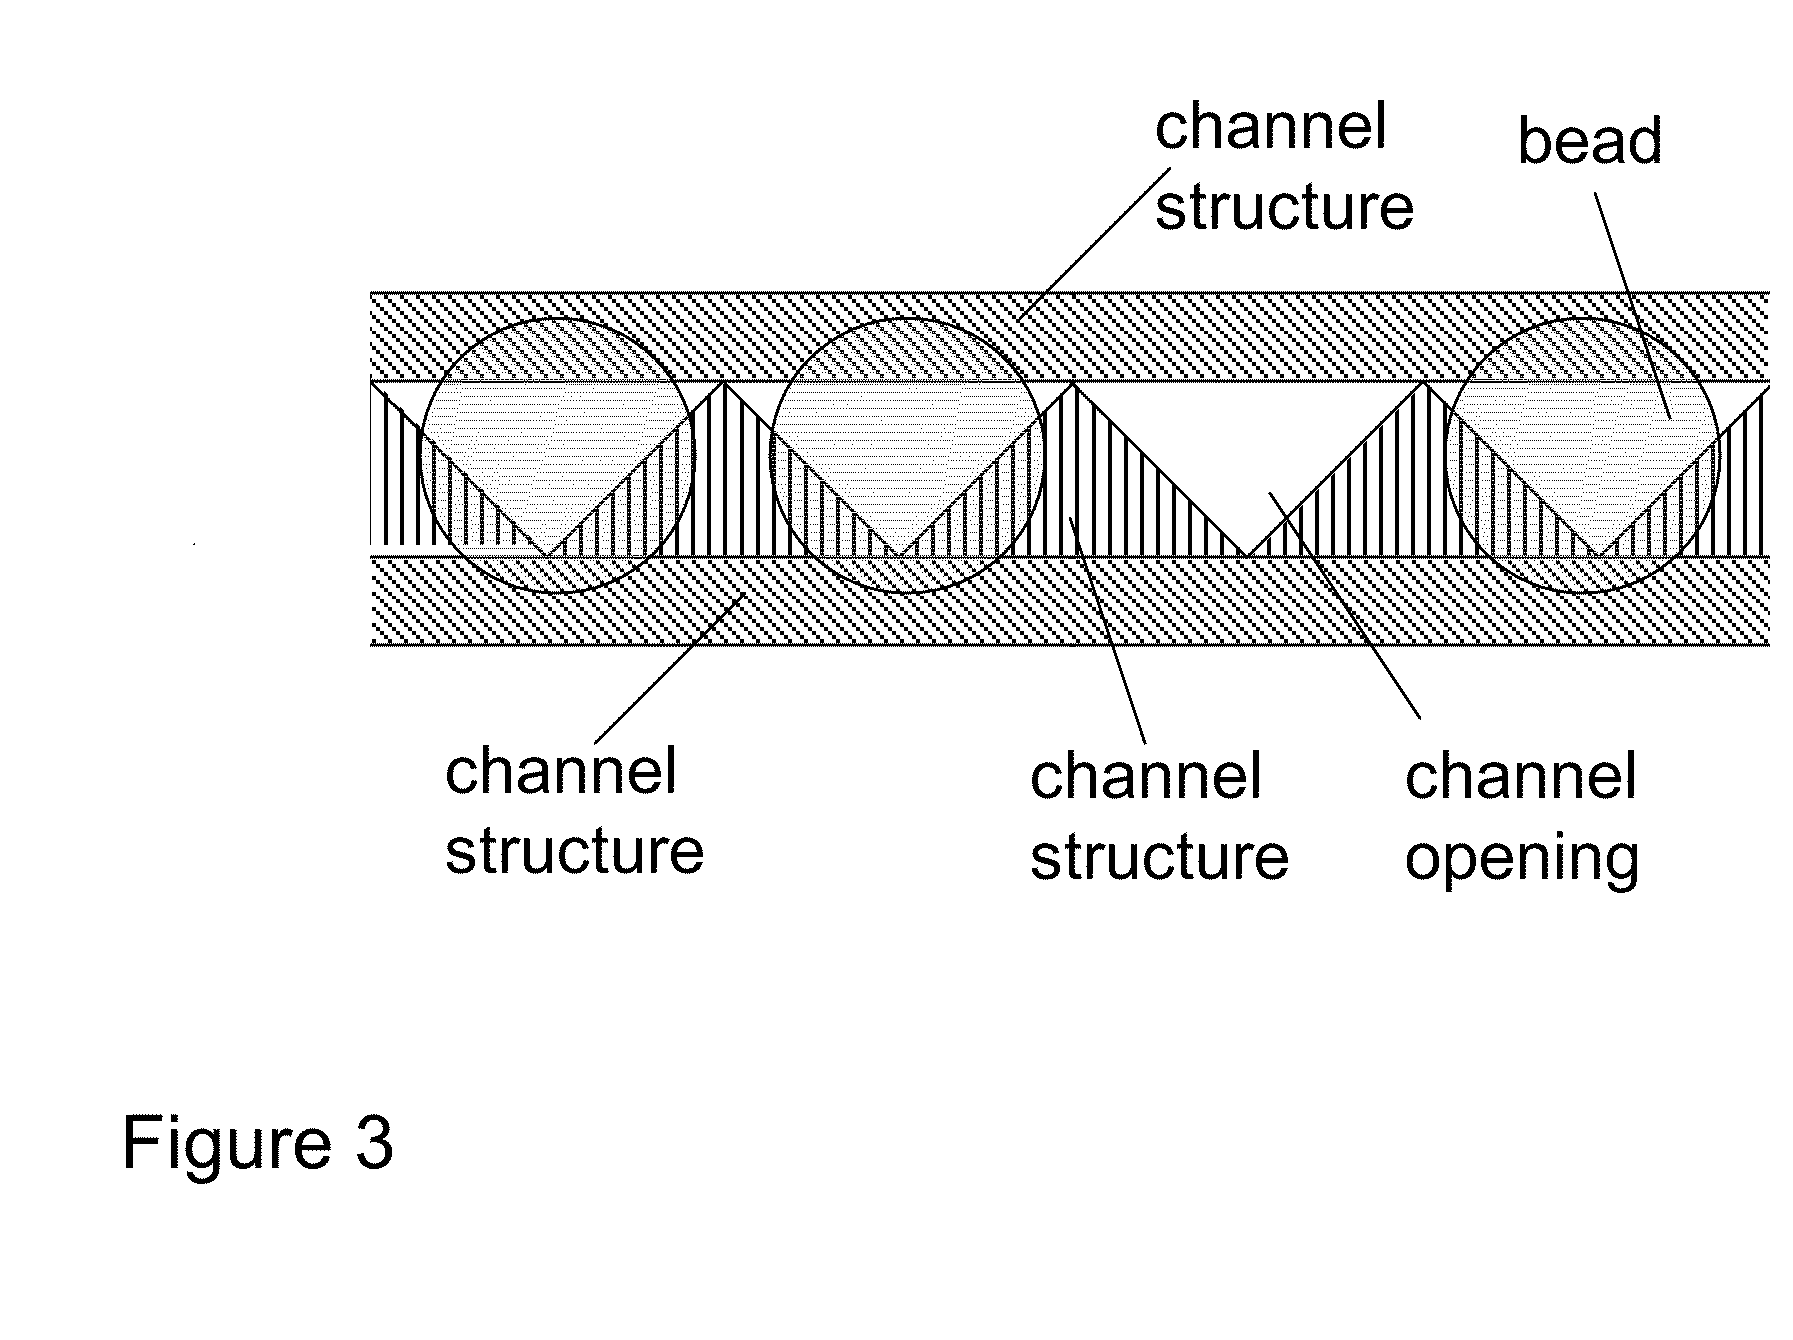 Methods for sanger sequencing using particle associated clonal amplicons and highly parallel electrophoretic size-based separation